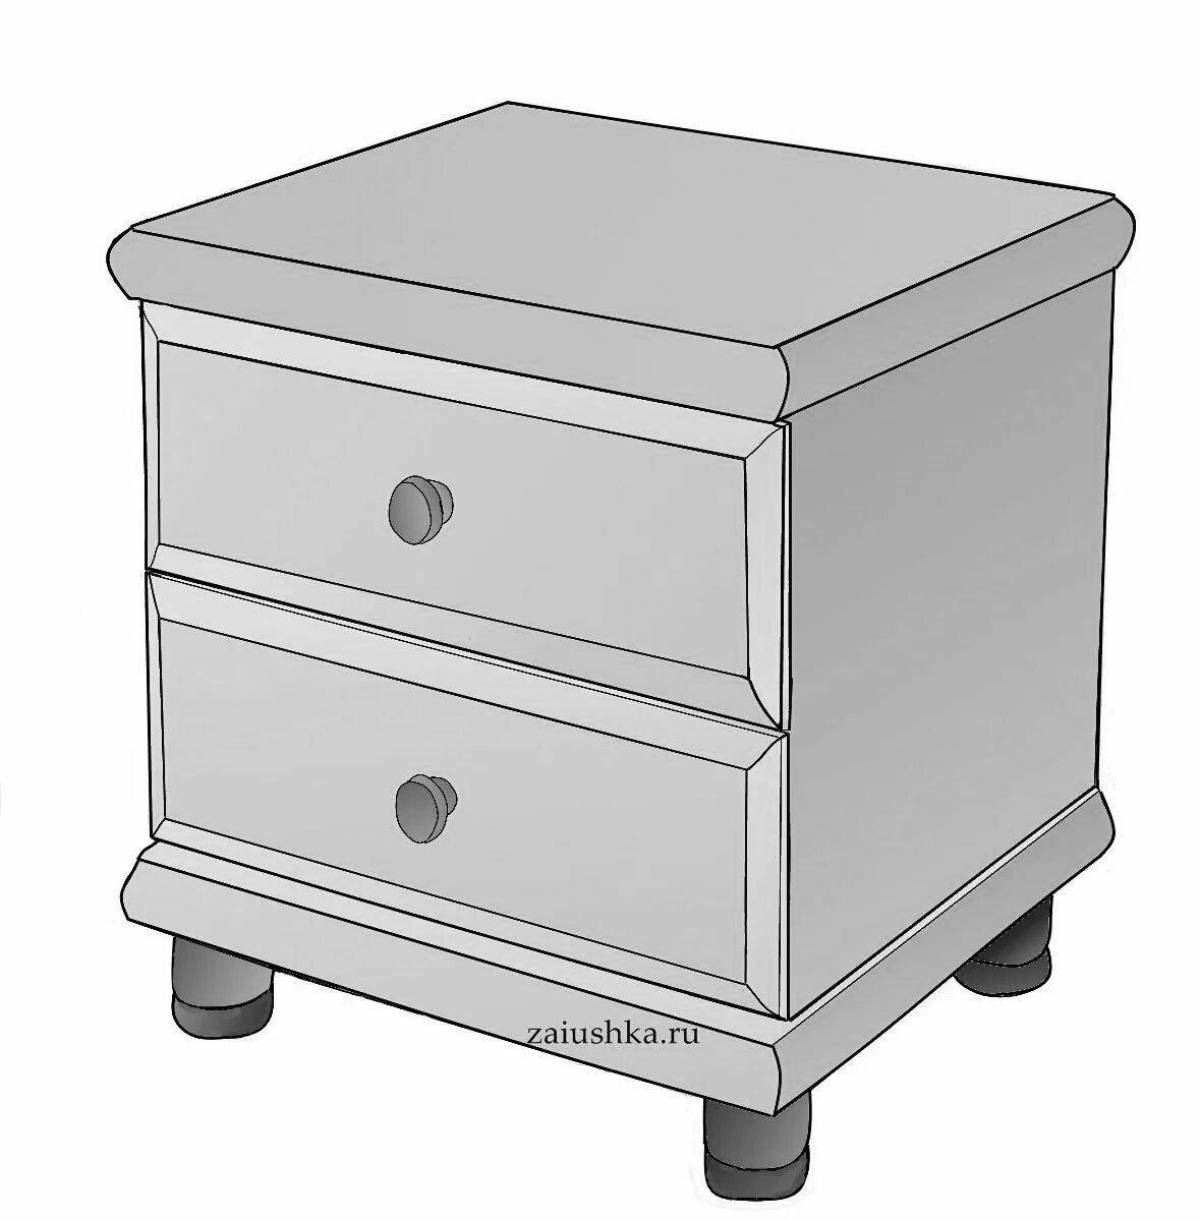 Coloring book shiny nightstand